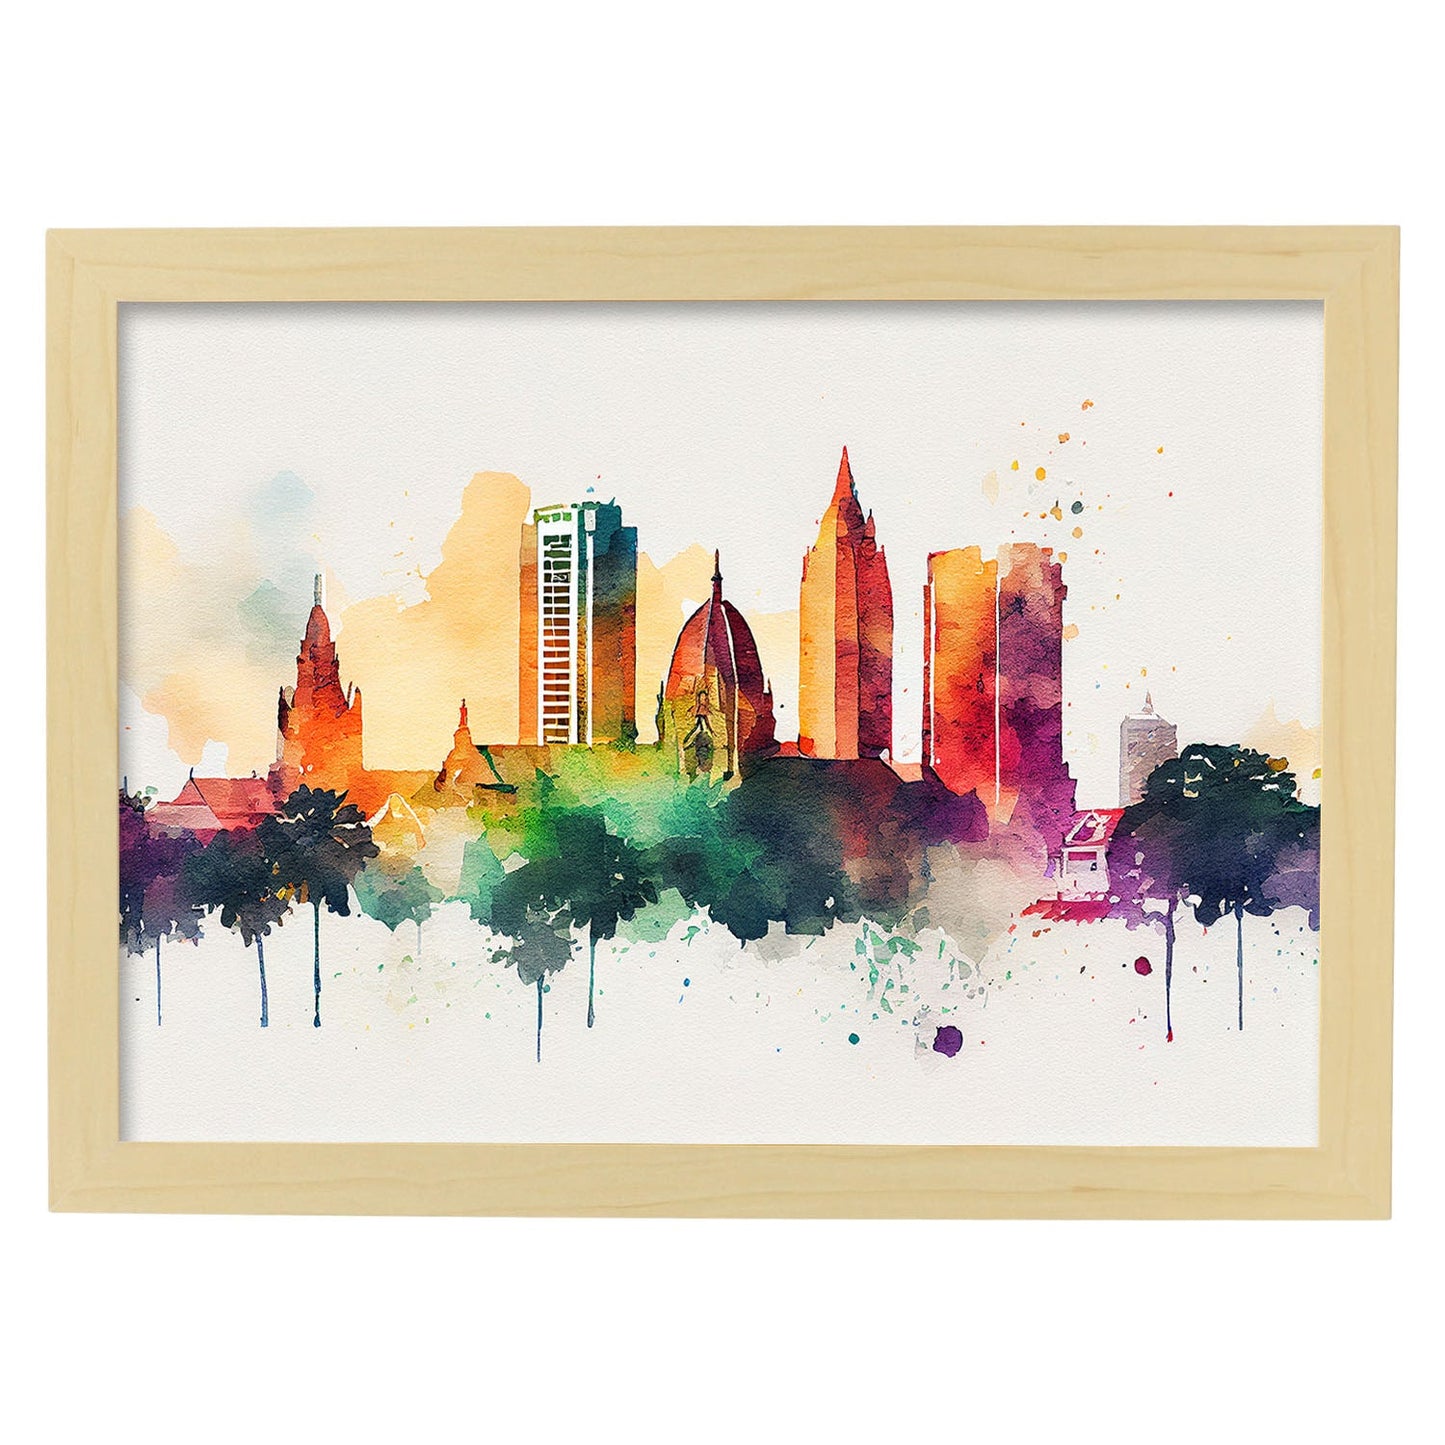 Nacnic watercolor of a skyline of the city of Colombo. Aesthetic Wall Art Prints for Bedroom or Living Room Design.-Artwork-Nacnic-A4-Marco Madera Clara-Nacnic Estudio SL